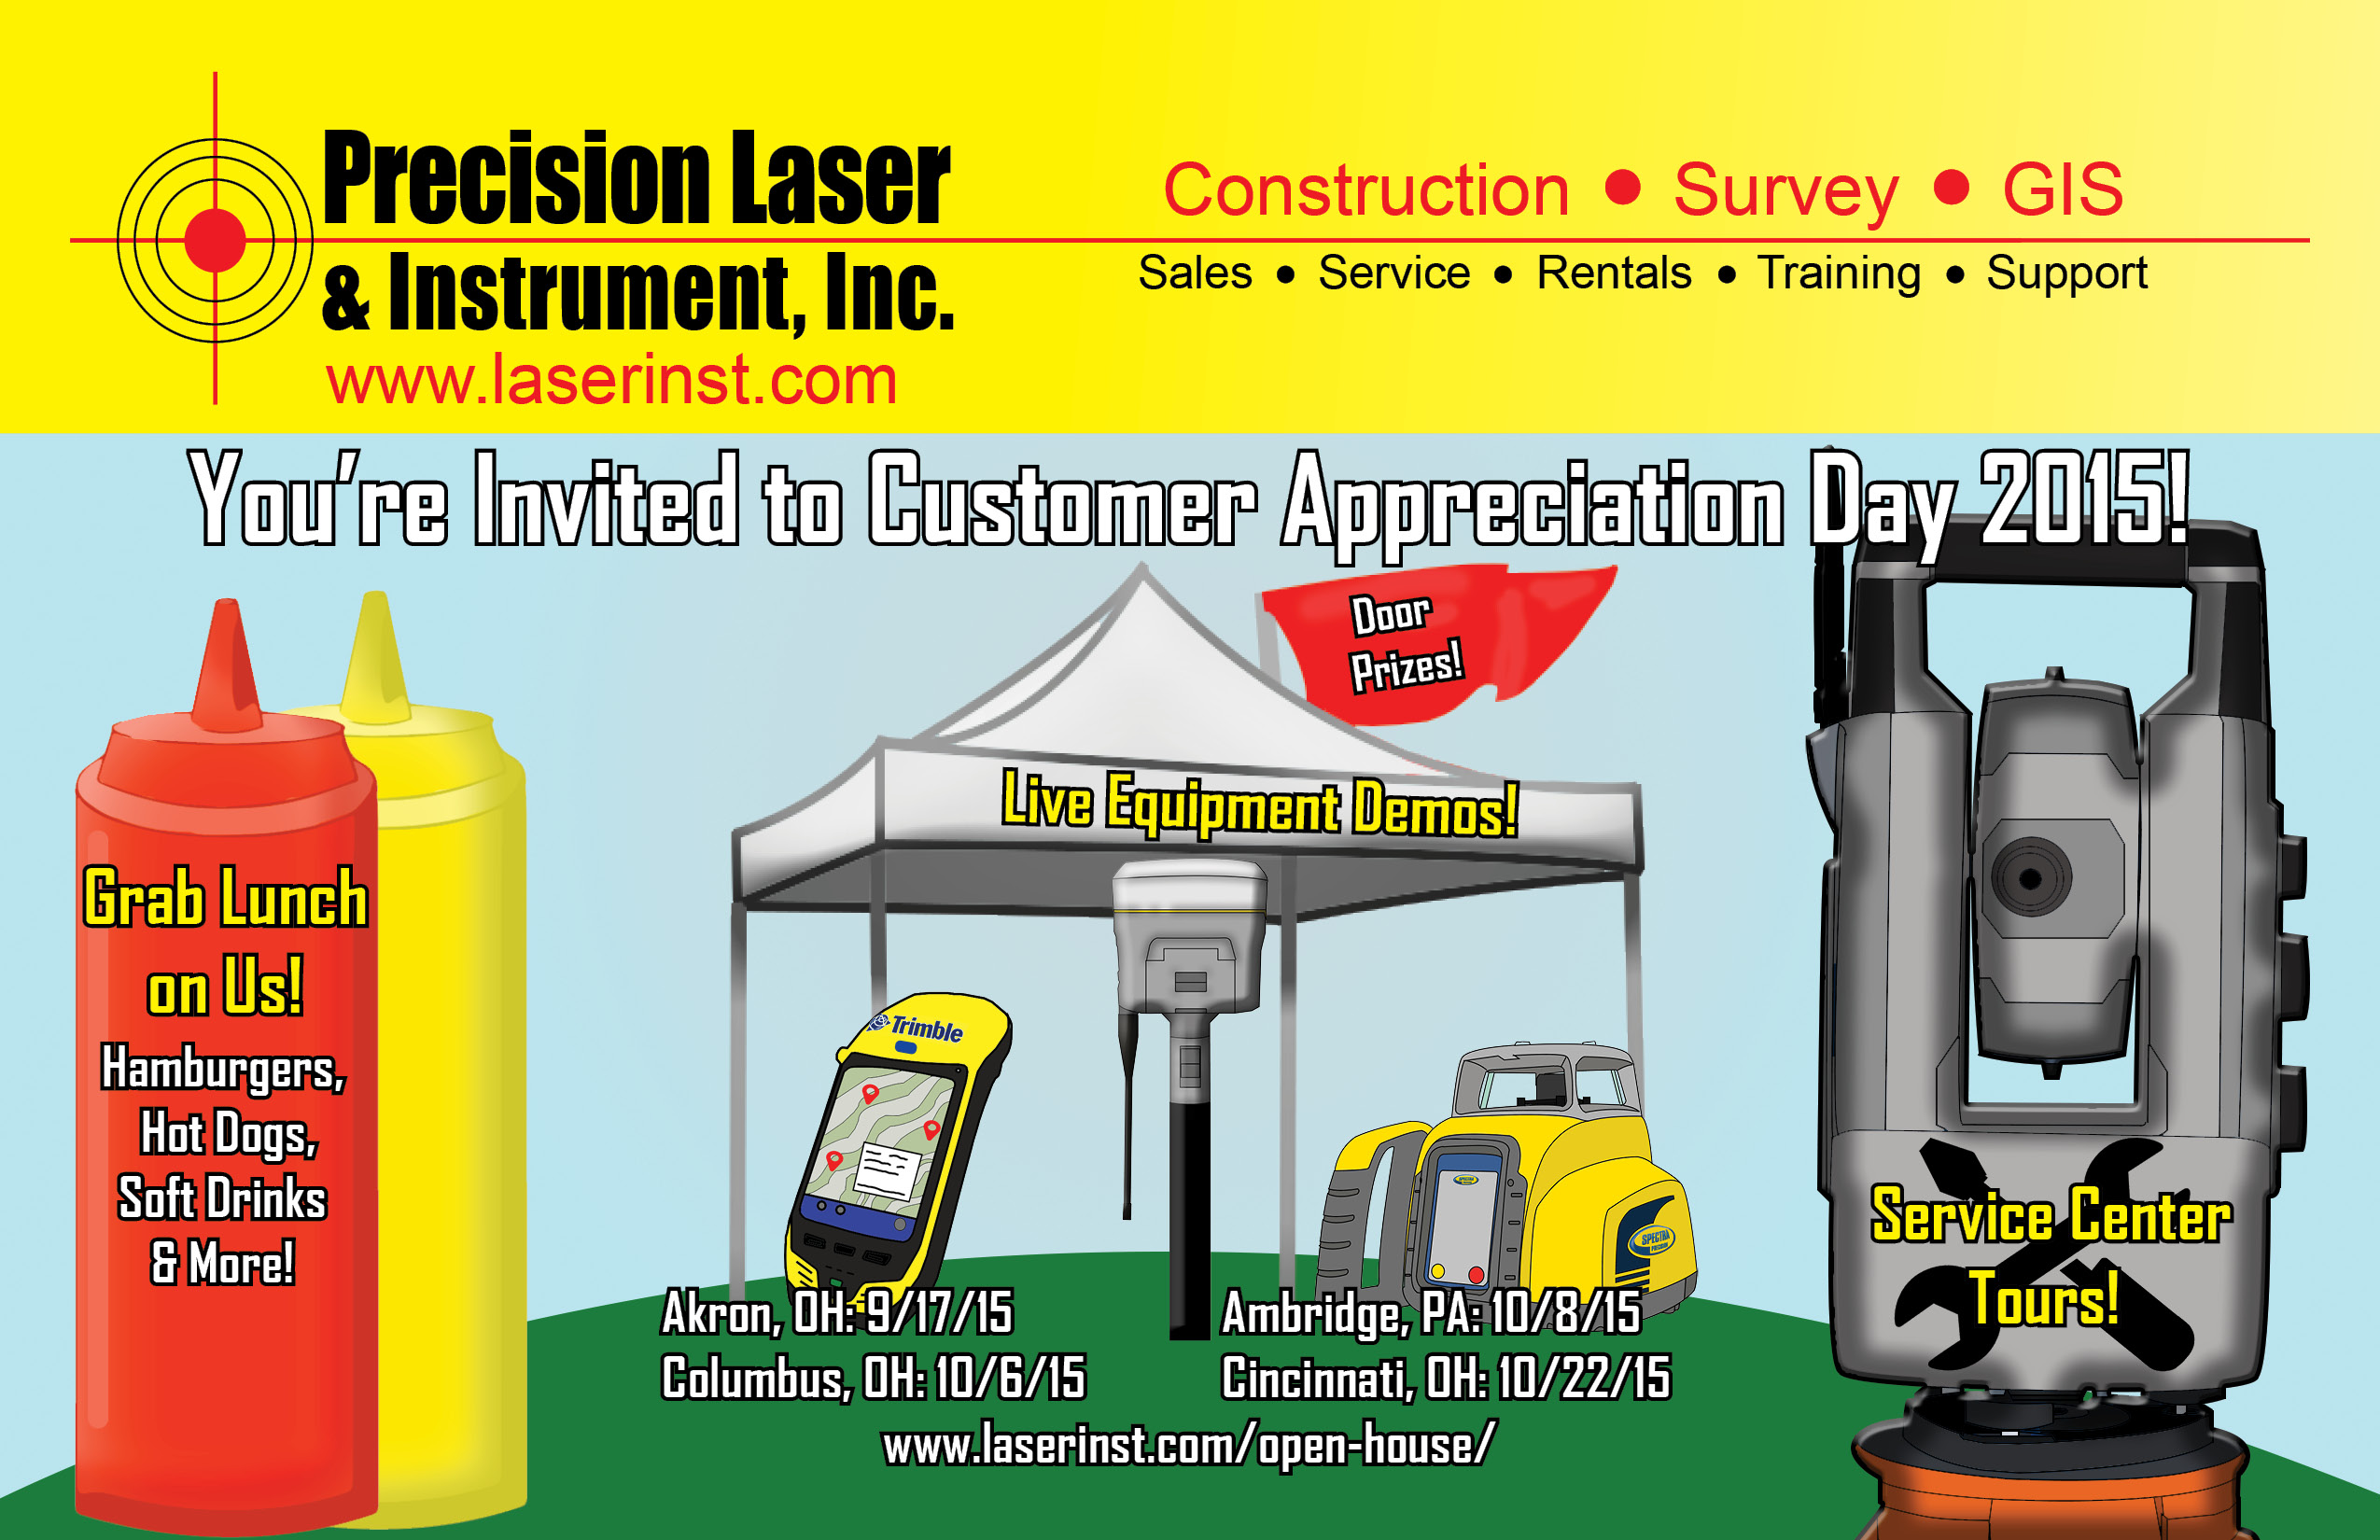 You're invited to Customer Appreciation Day 2015! Grab lunch on us, see live equipment demos, take part in service center tours, and enter to win door prizes! Dates are as follows: Akron, OH: 9/17/15; Columbus, OH: 10/6/15; Ambridge, PA: 10/8/15; Cincinati, OH: 10/22/15